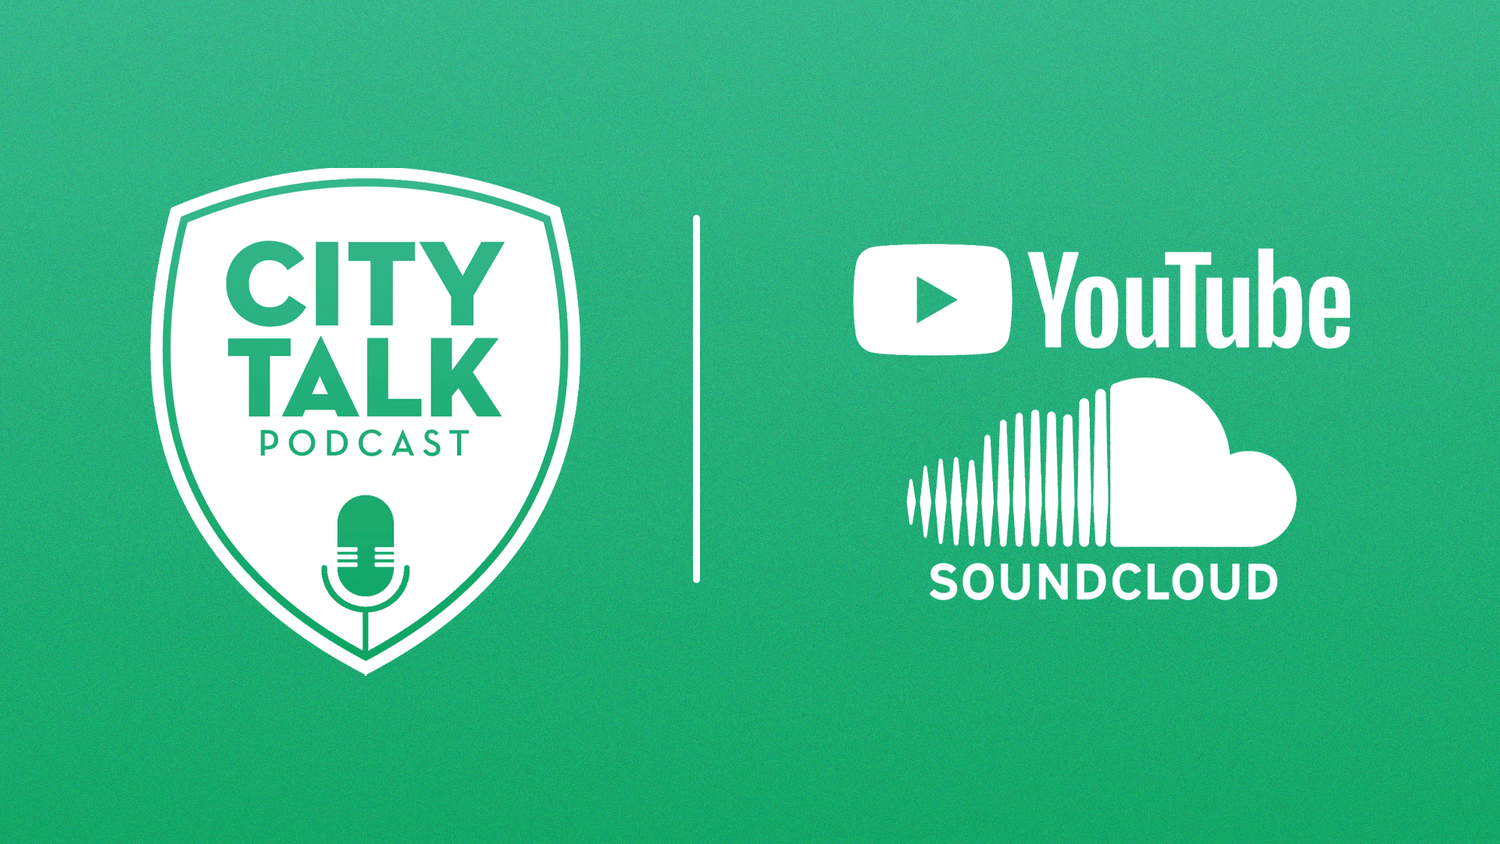 Introducing City Talk - The Official Cork City FC podcast!